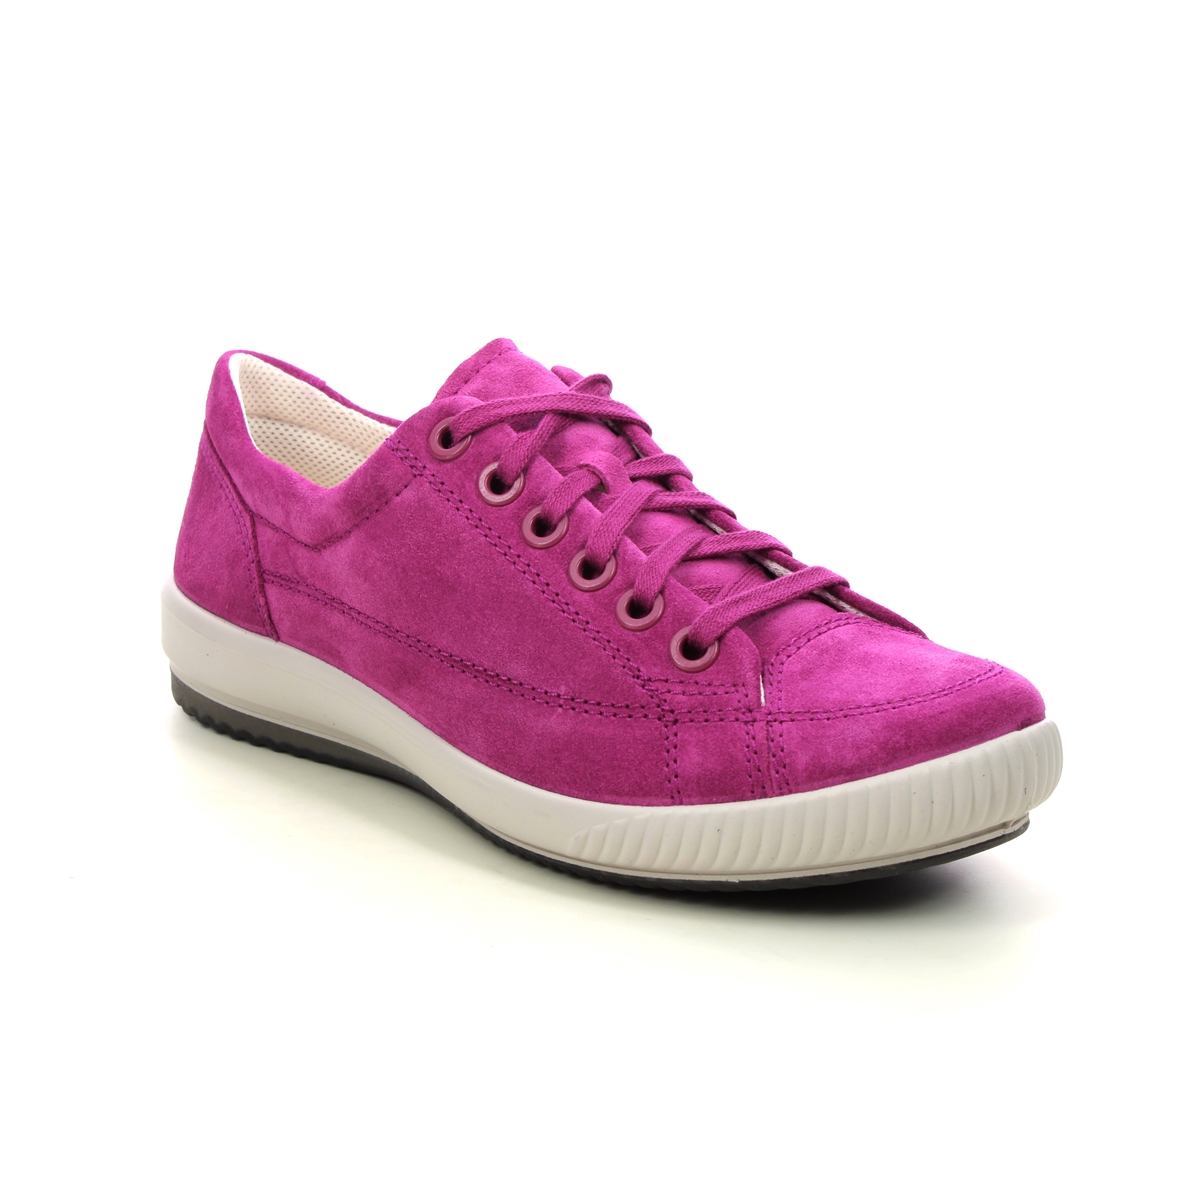 Legero Tanaro 5 Stitch Fuchsia Suede Womens lacing shoes 2000161-5670 in a Plain Leather in Size 4.5